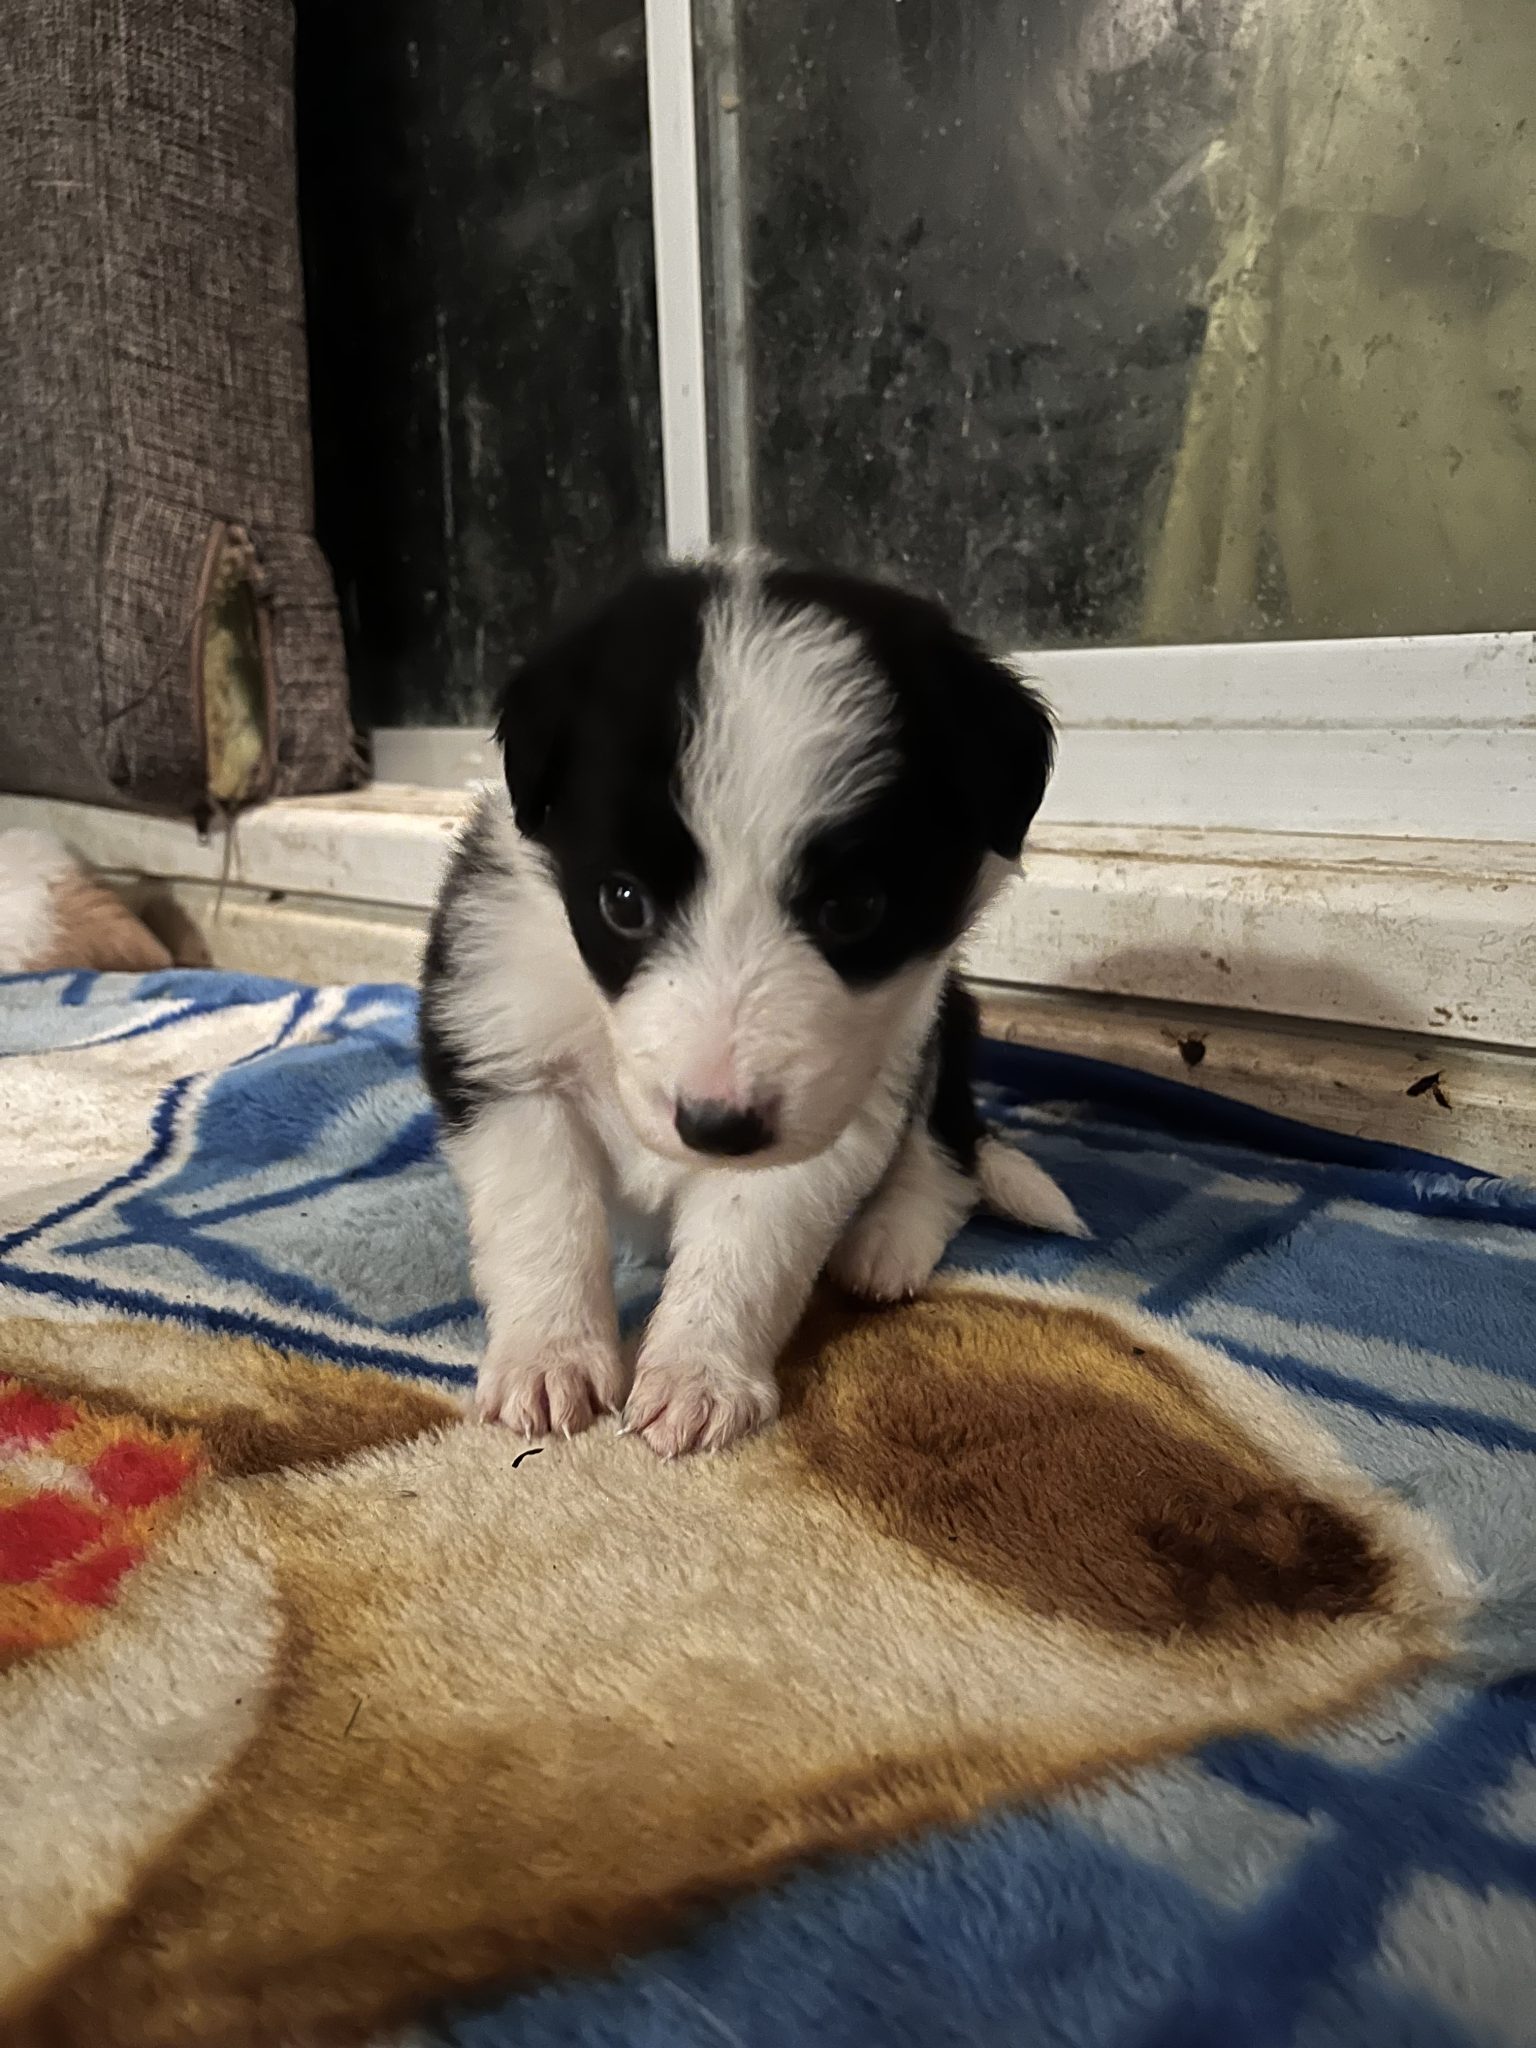 Purebred long haired border collie puppies